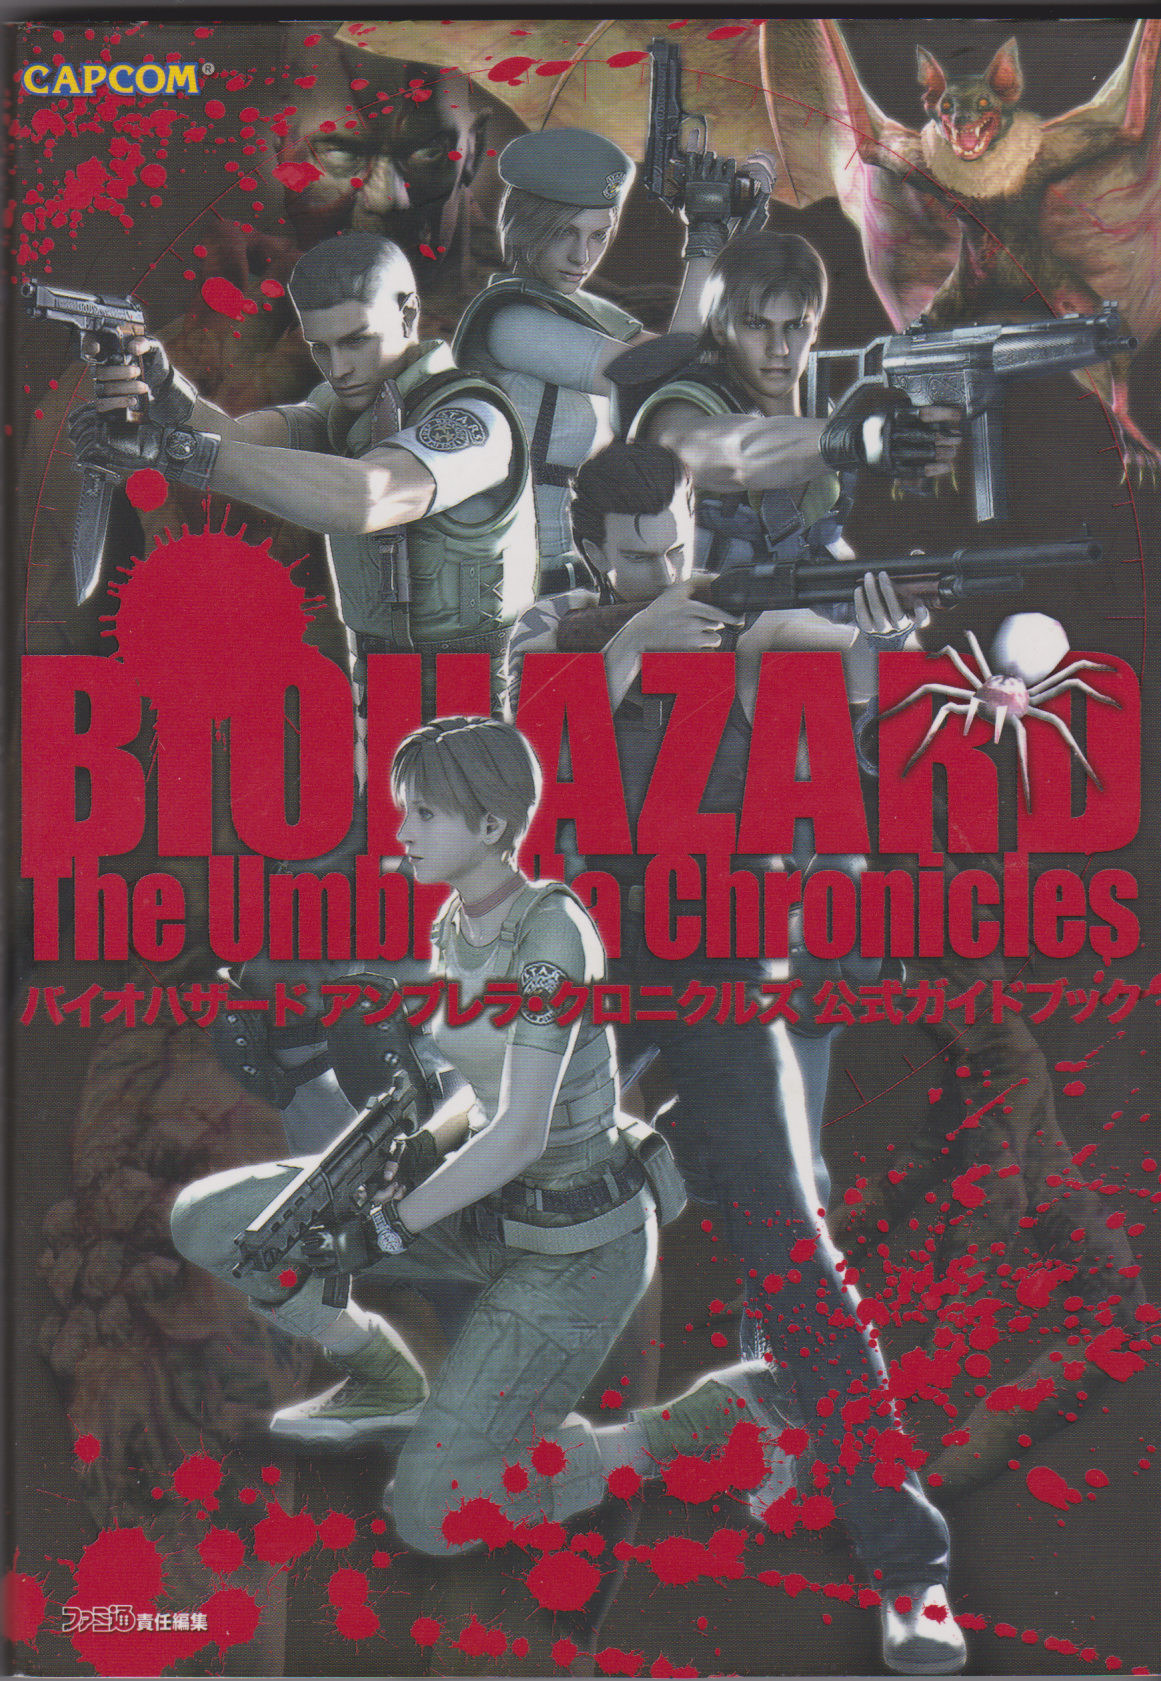 BIOHAZARD The Umbrella Chronicles Official Guidebook | Resident